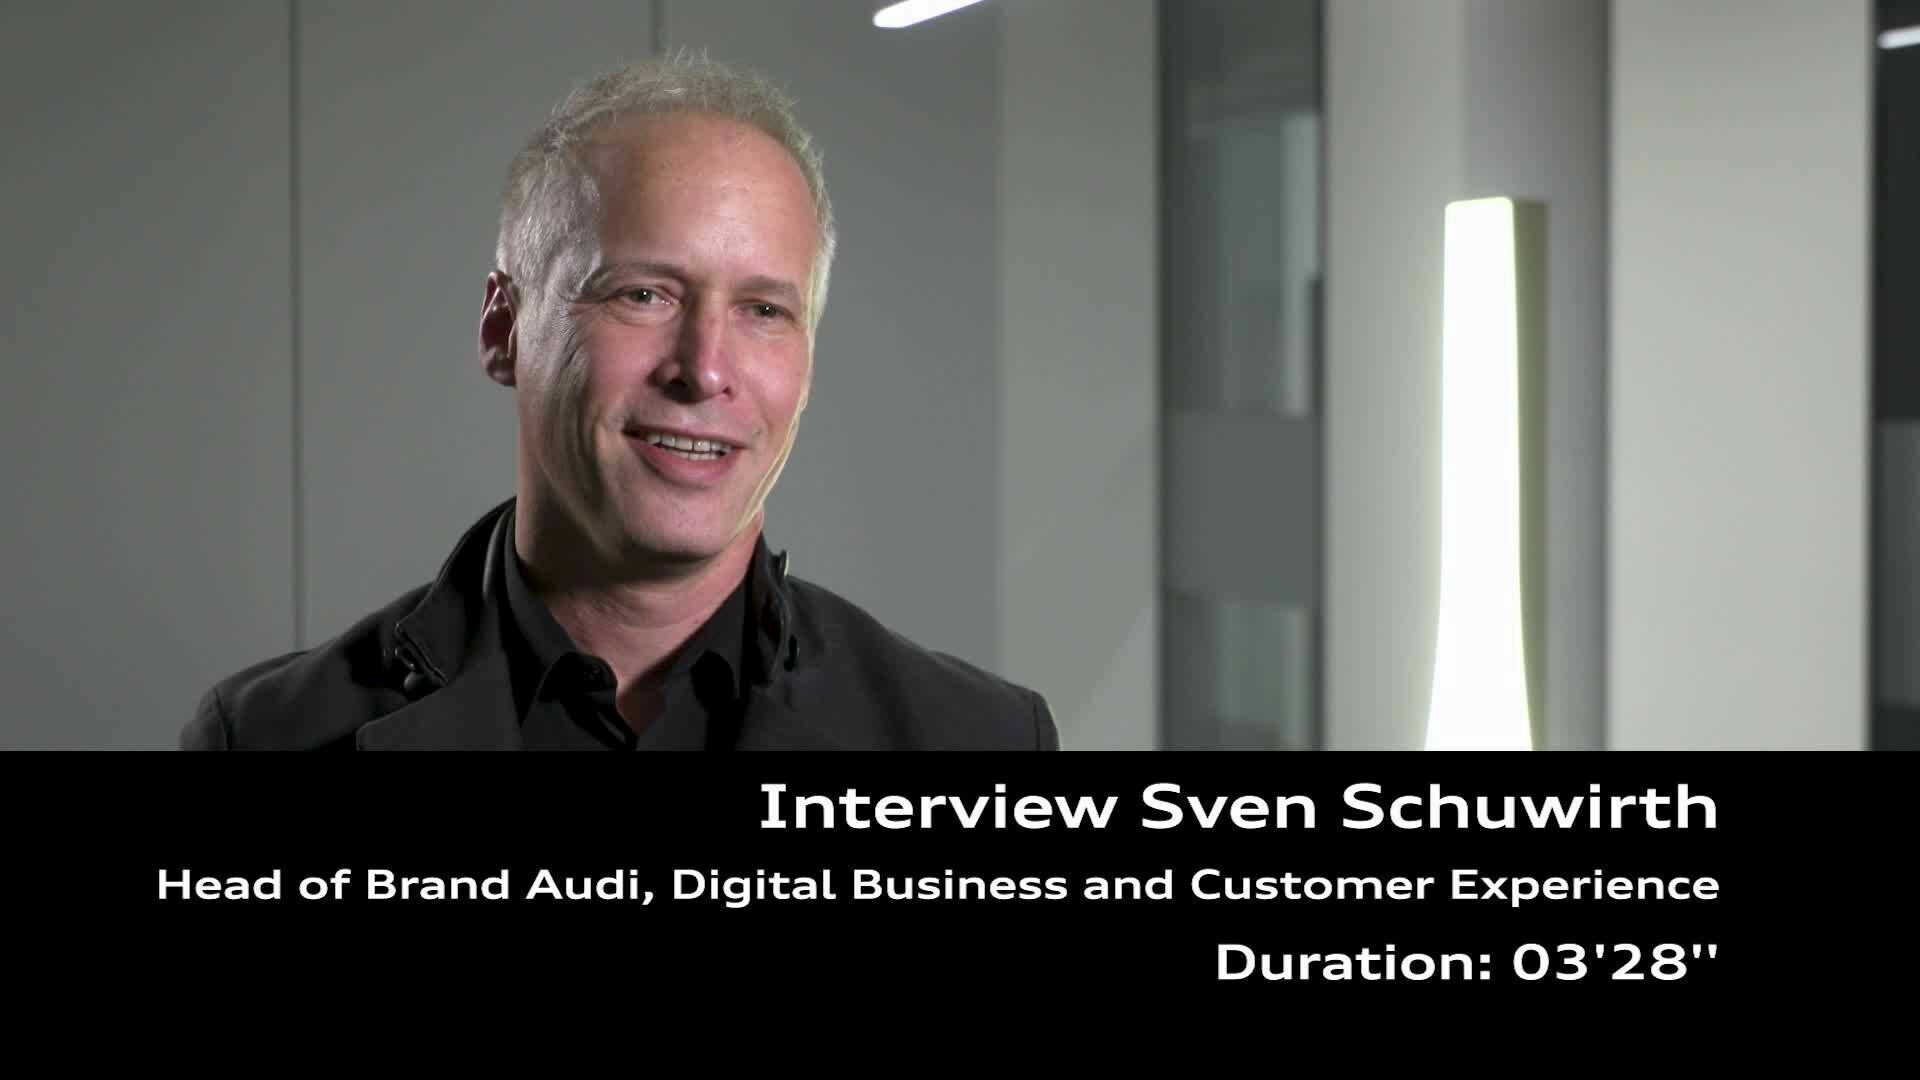 Footage Interview Sven Schuwirth about the Game Day spot